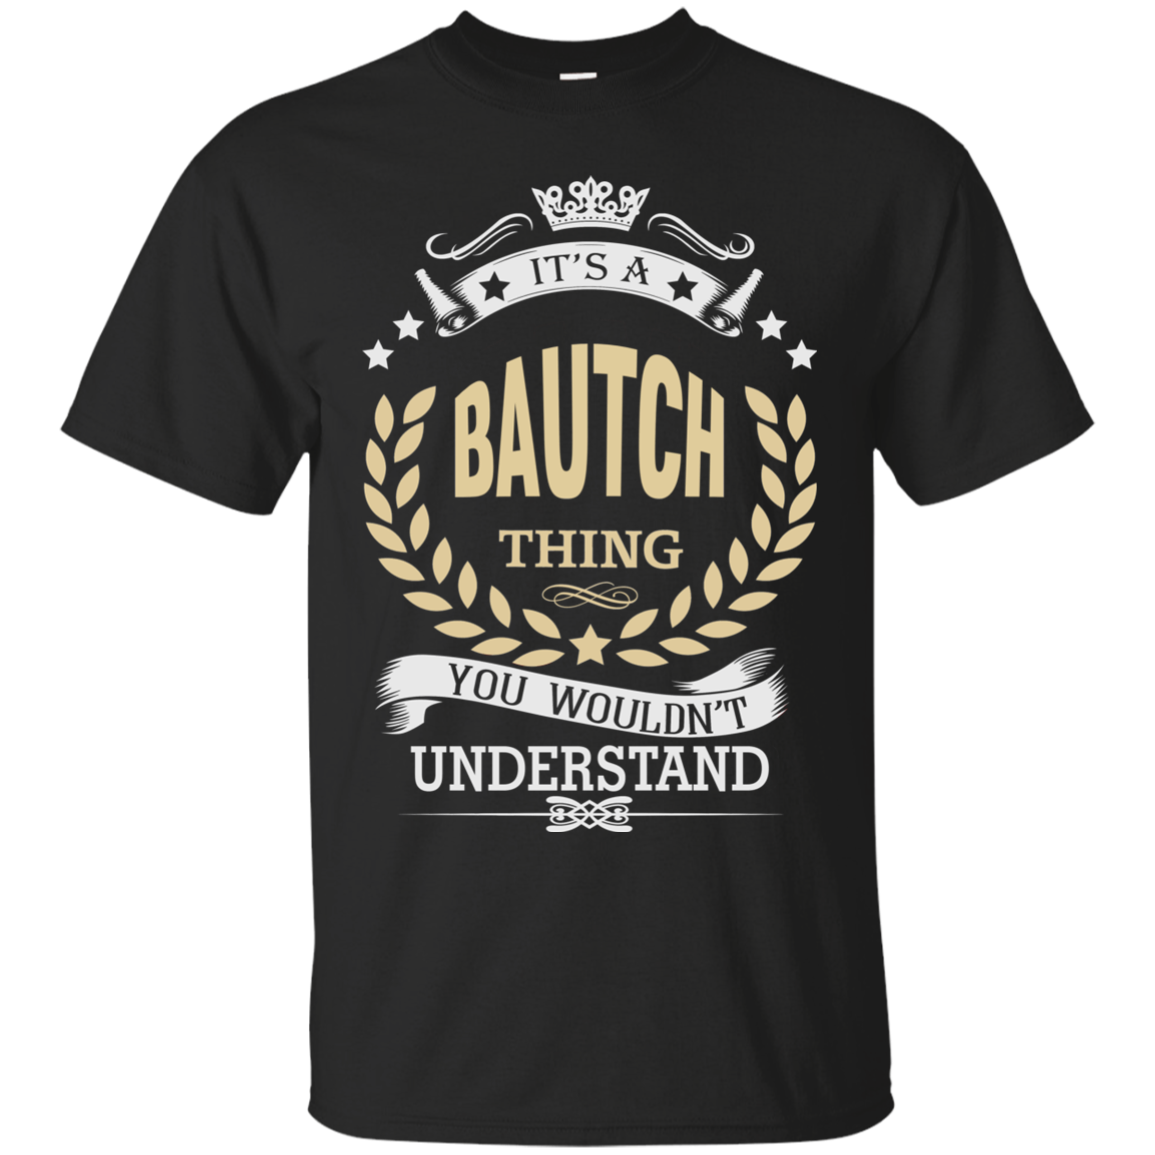 Bautch Shirts It's A Bautch Thing You Wouldn't Understand - Teesmiley